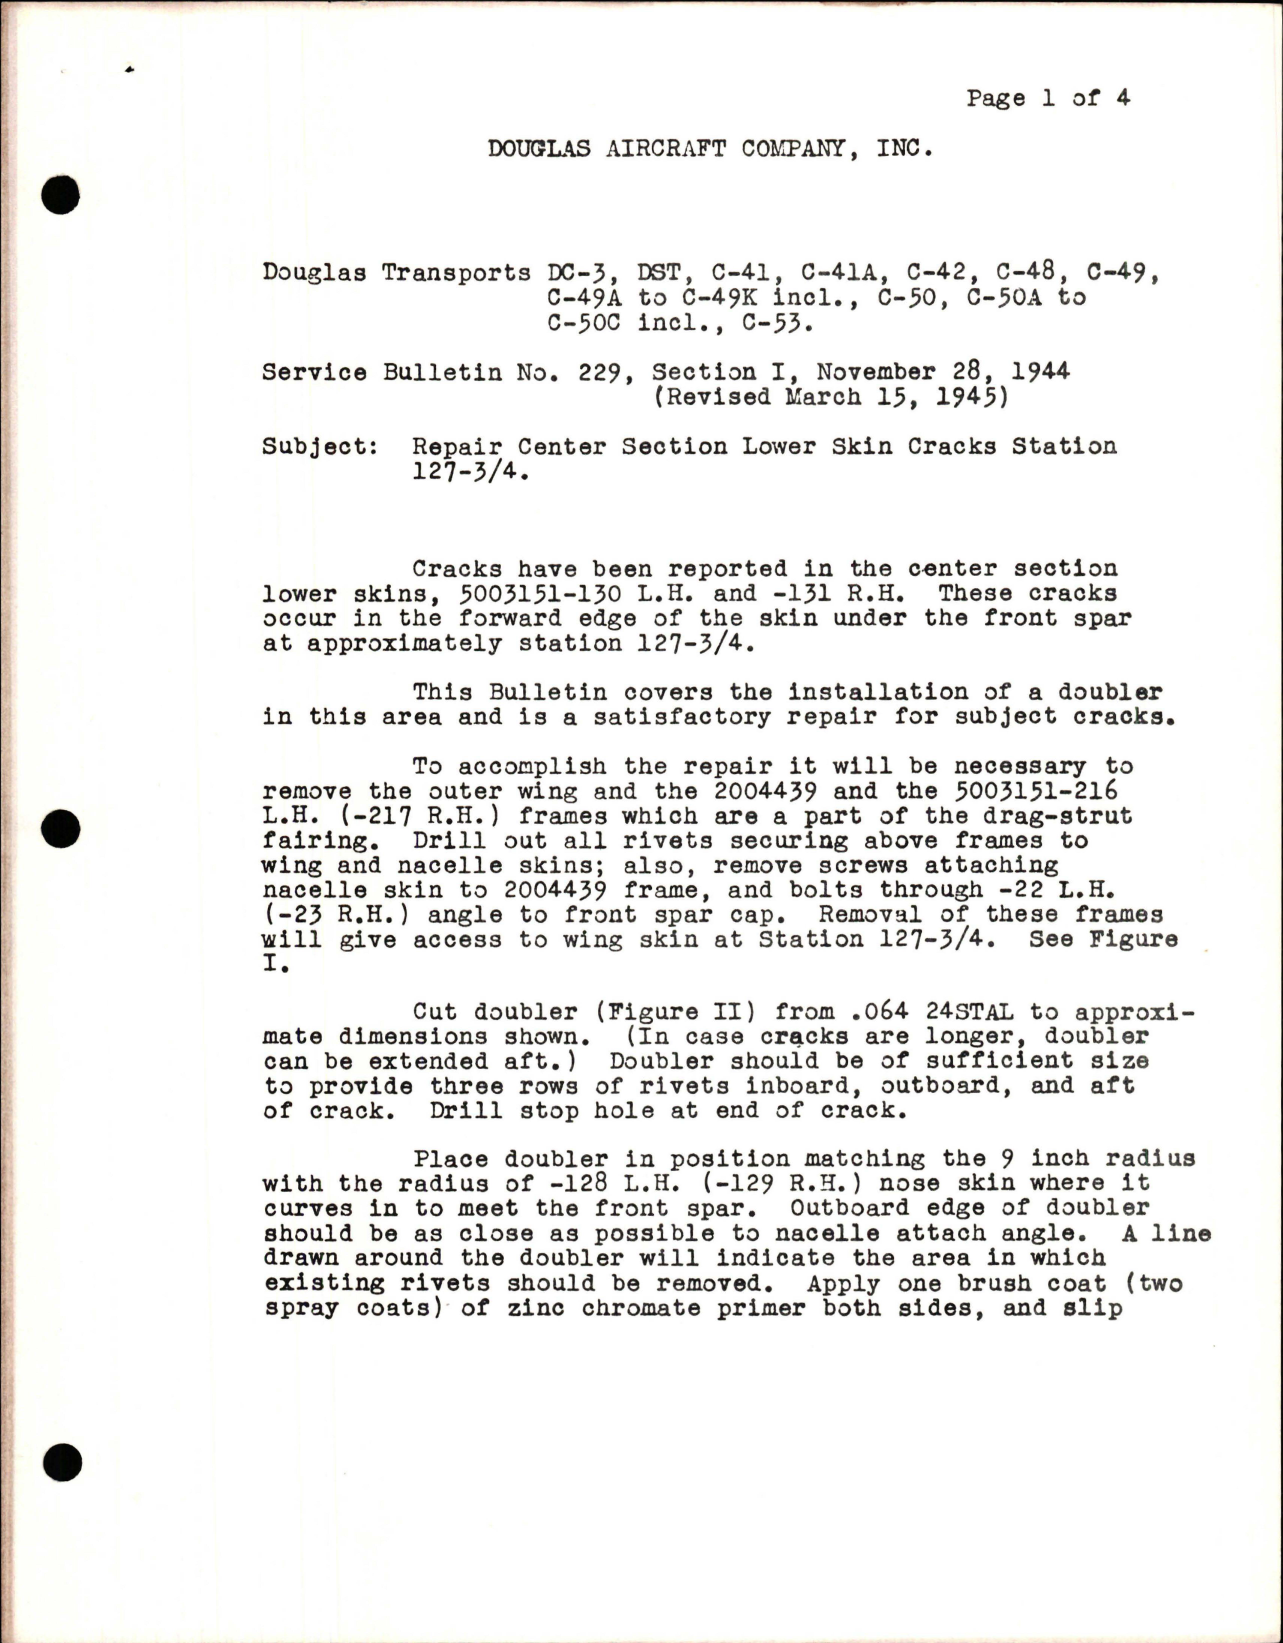 Sample page 1 from AirCorps Library document: Repair Center Section Lower Skin Cracks Station 127-3/4